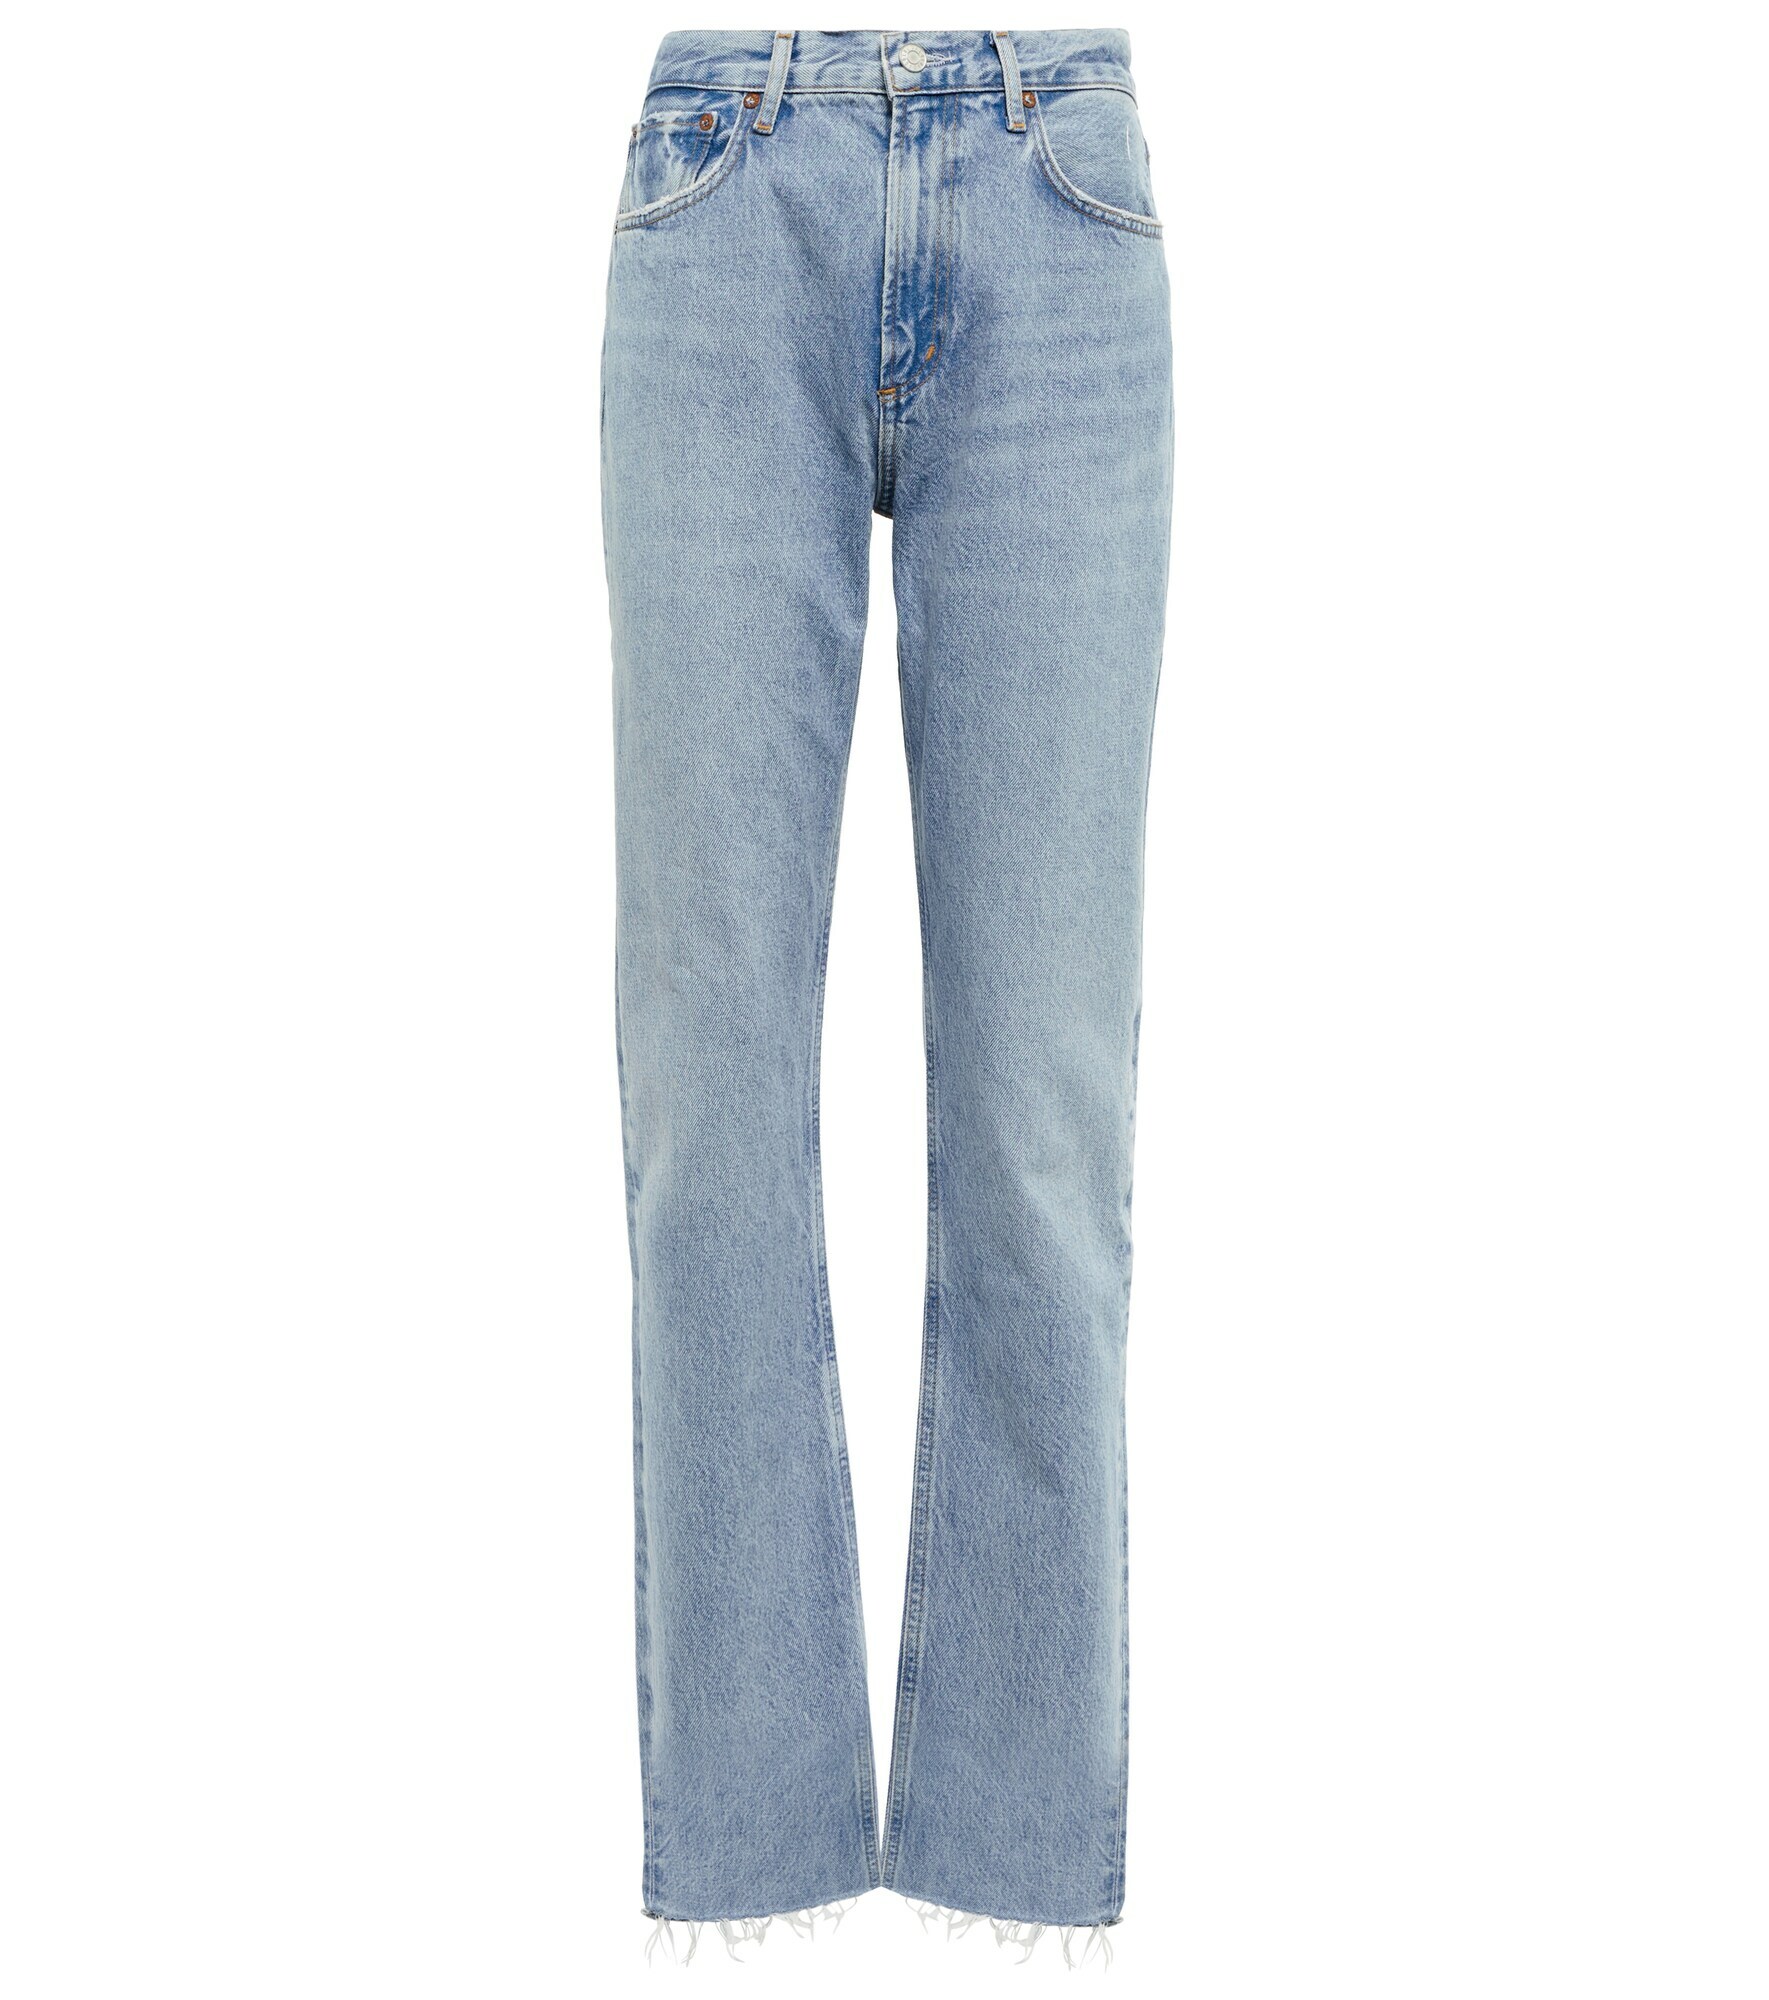 Agolde - Cherie high-rise straight jeans AGOLDE